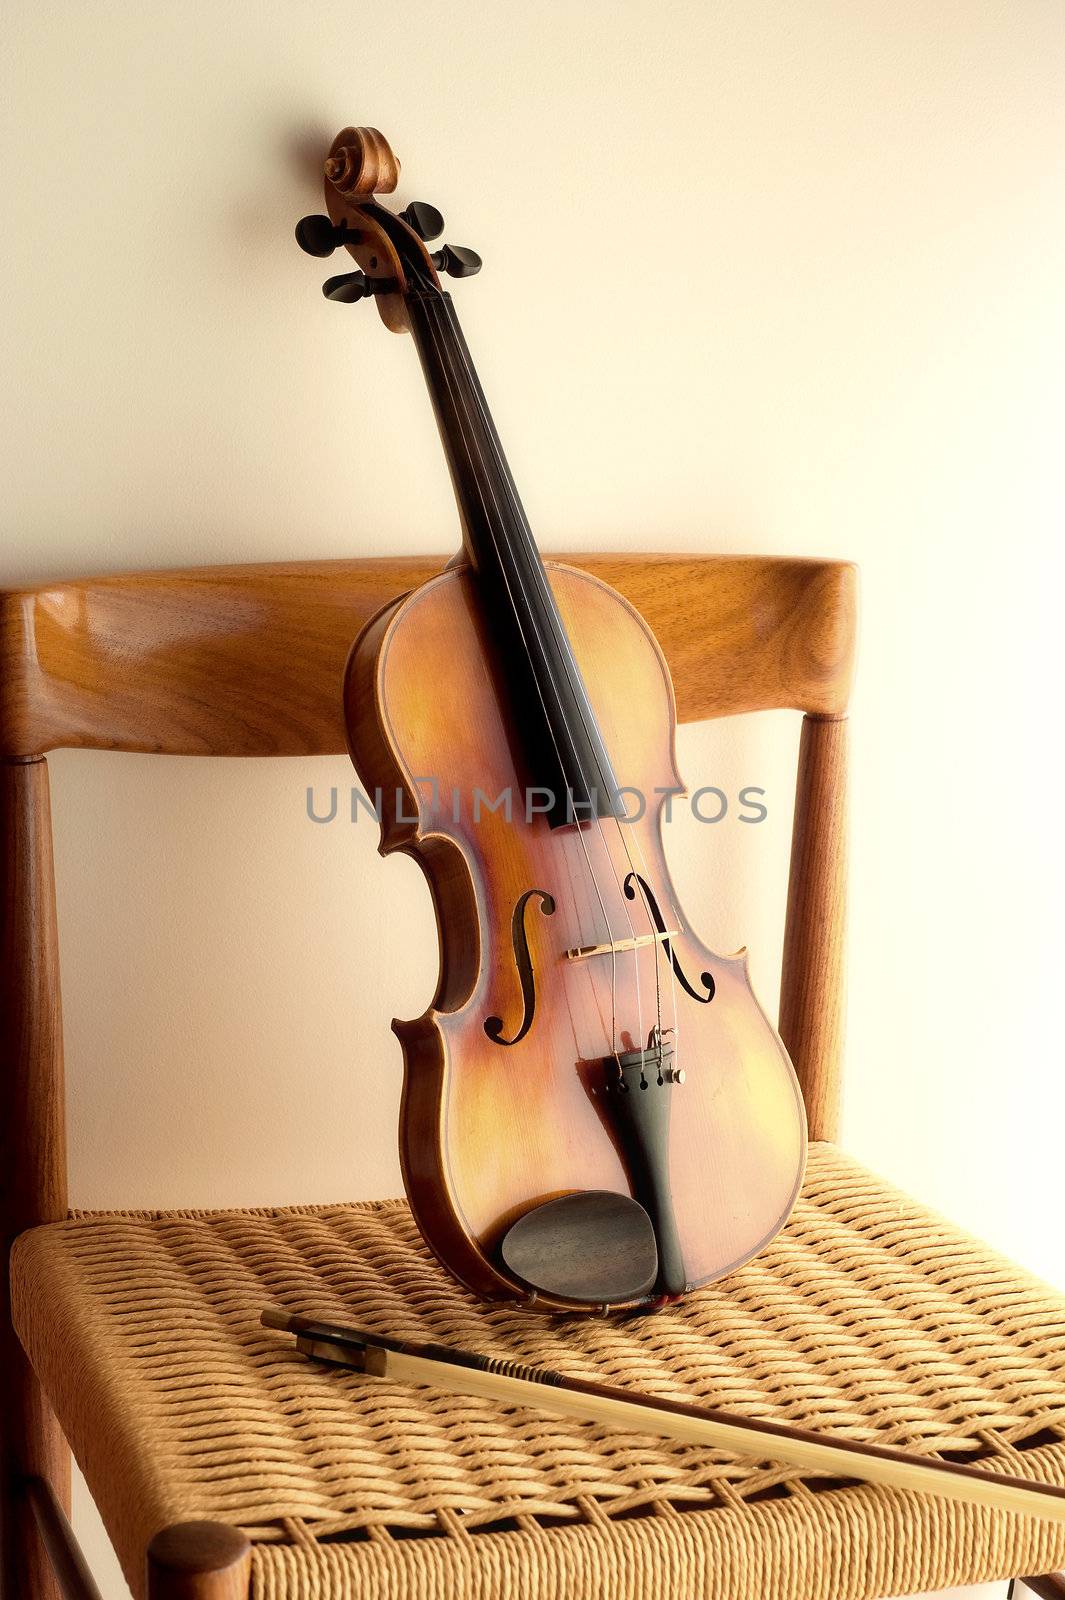 Violin leaning against rope chair